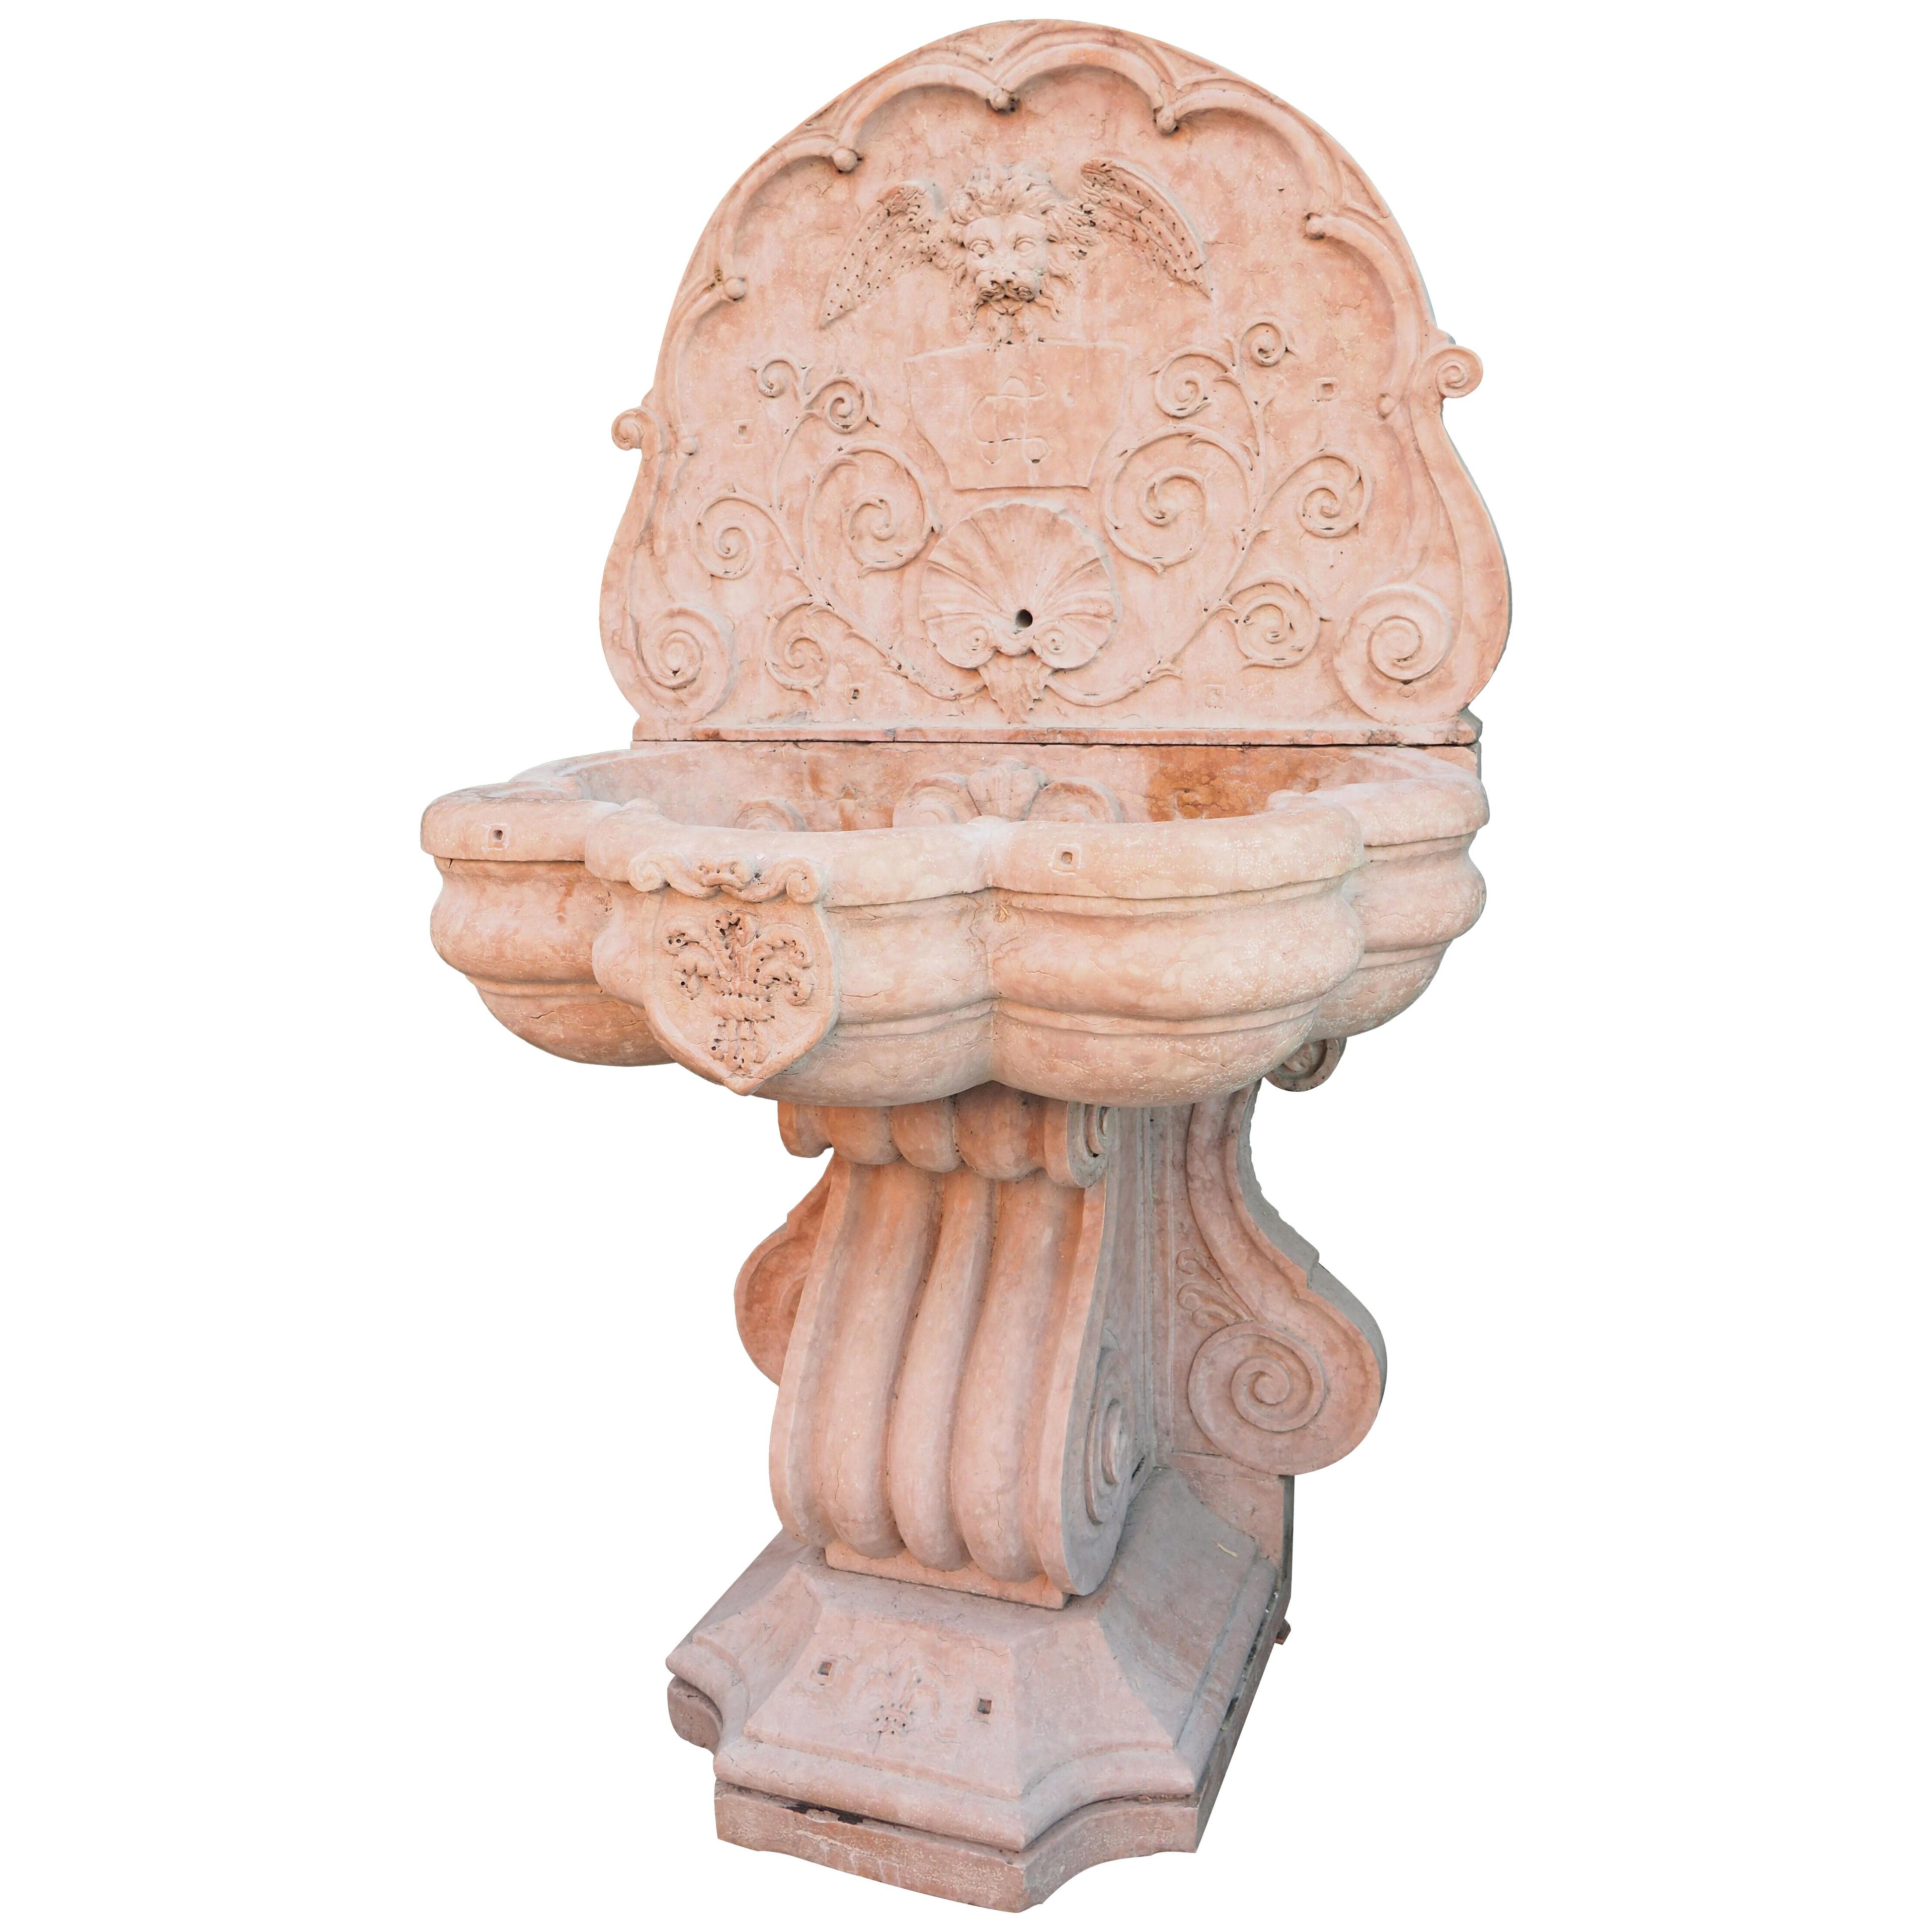 Monumental Italian Wall Fountain in Carved Verona Rossa Marble, Early 1900s